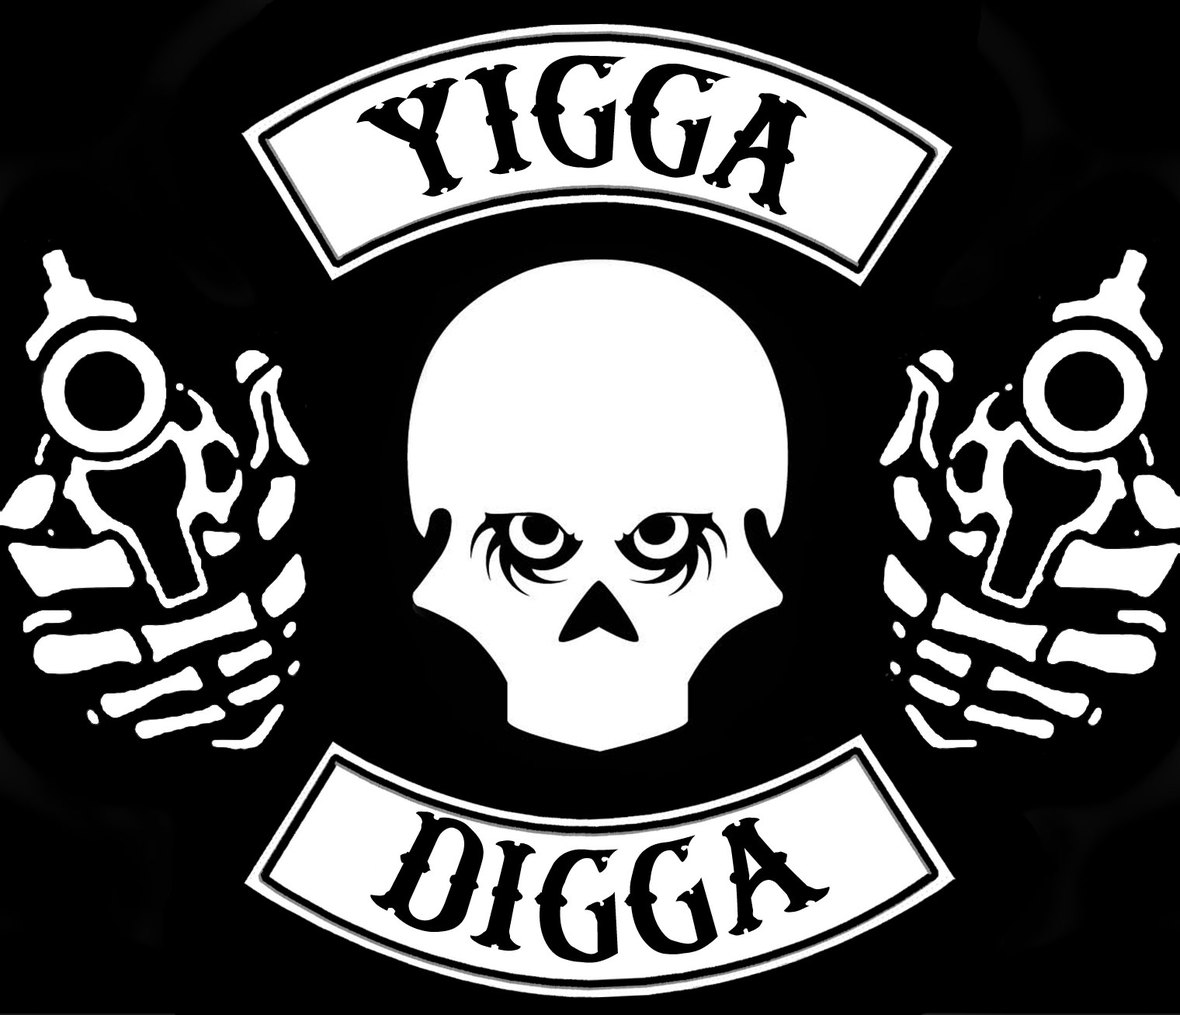 Yigga Digga Releases "Slave To The Life" Music Video From Upcoming Album